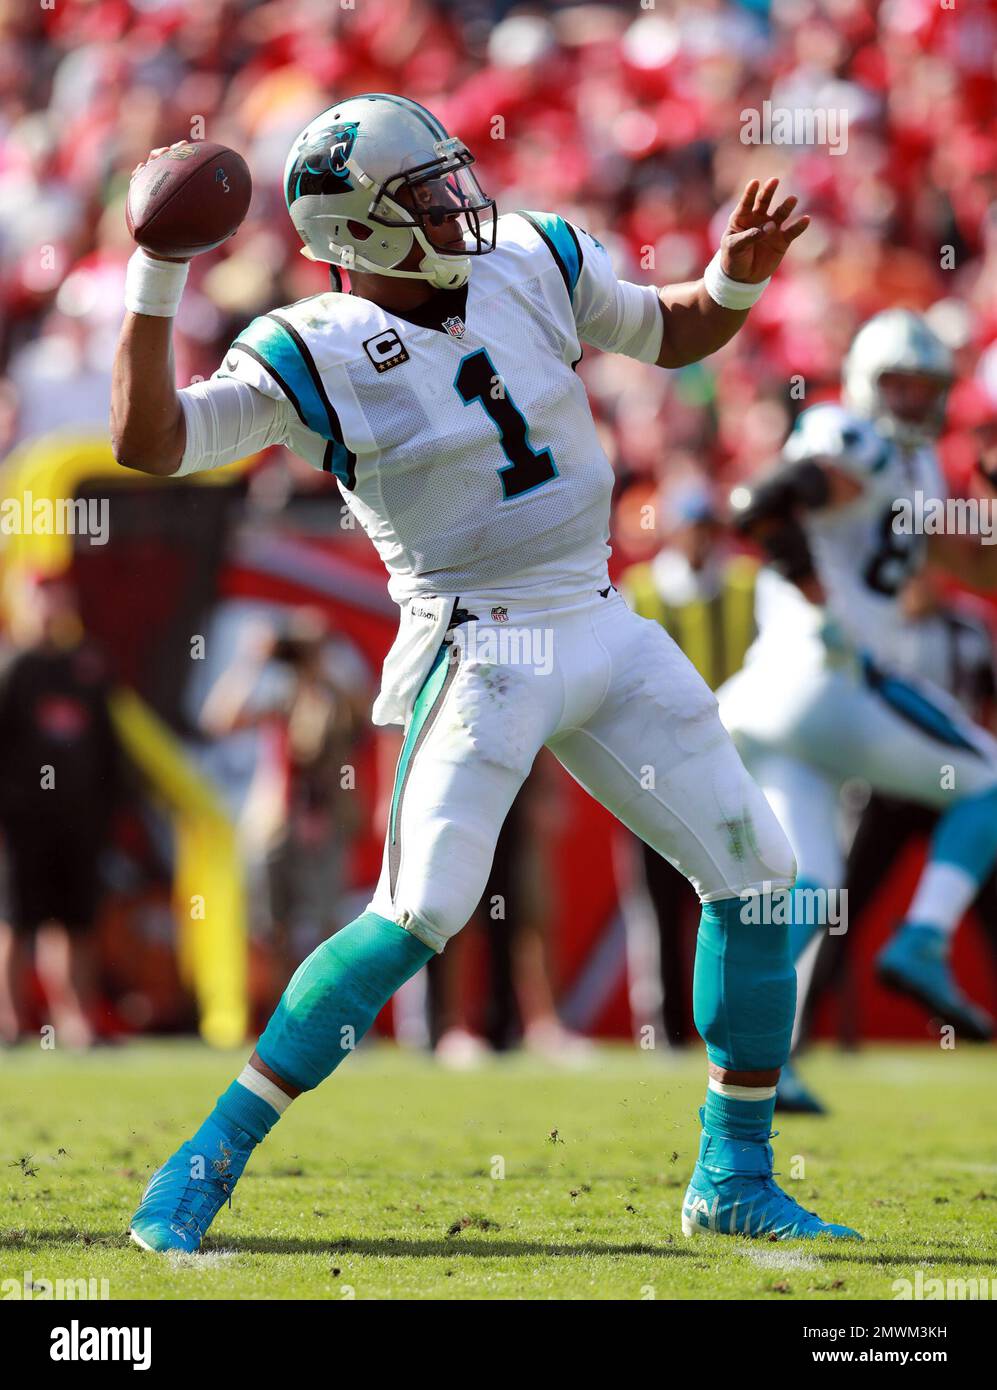 Carolina Panthers quarterback Cam Newton (1) looks to throw a pass against the Tampa Bay Buccaneers during an NFL football game Sunday, Jan. 1, 2017, in Tampa, Fla. (Jeff Haynes/AP Images for Panini) Stock Photo